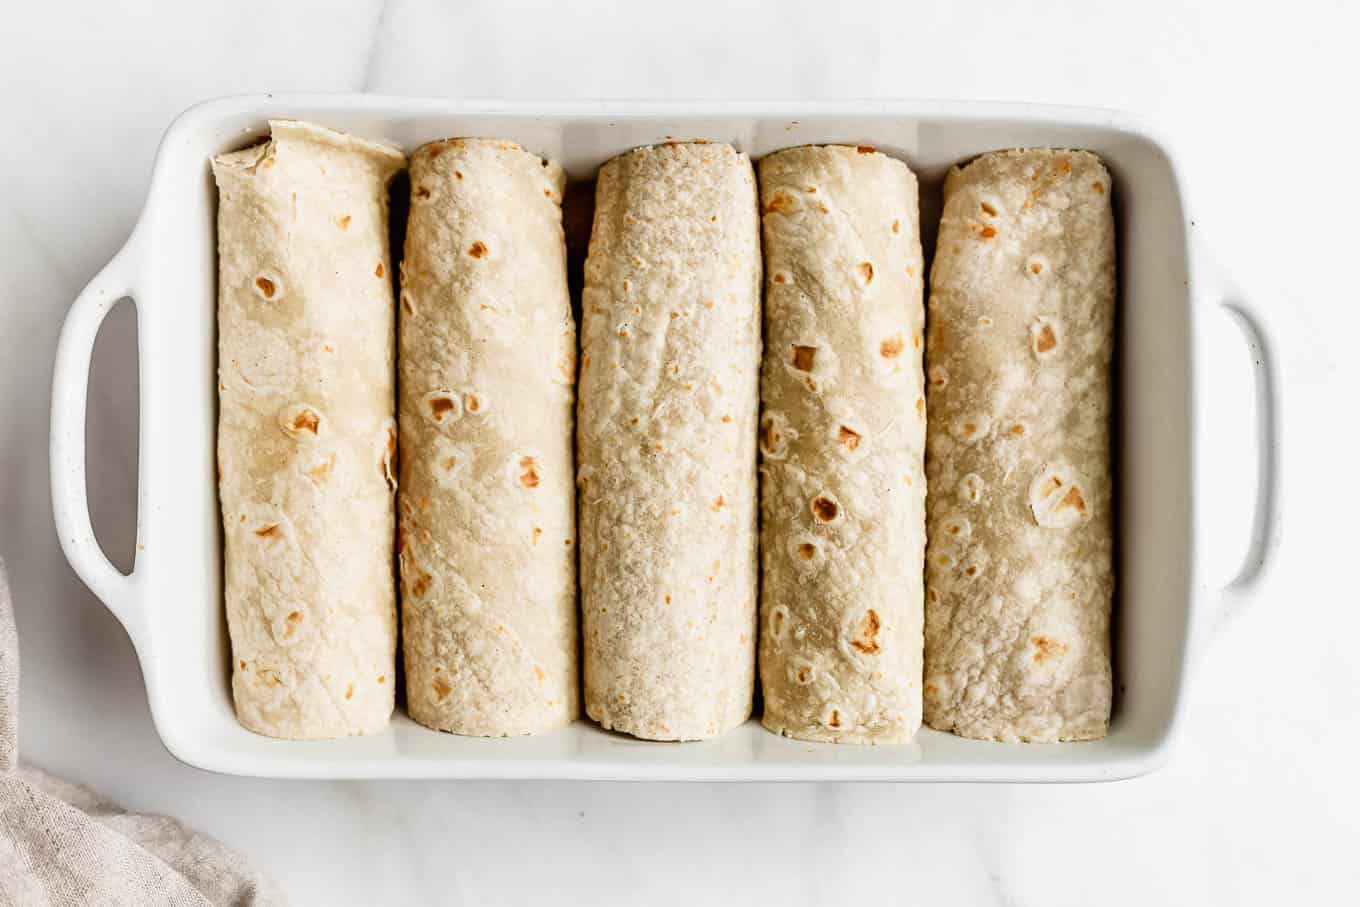 tortillas rolled up in a baking dish